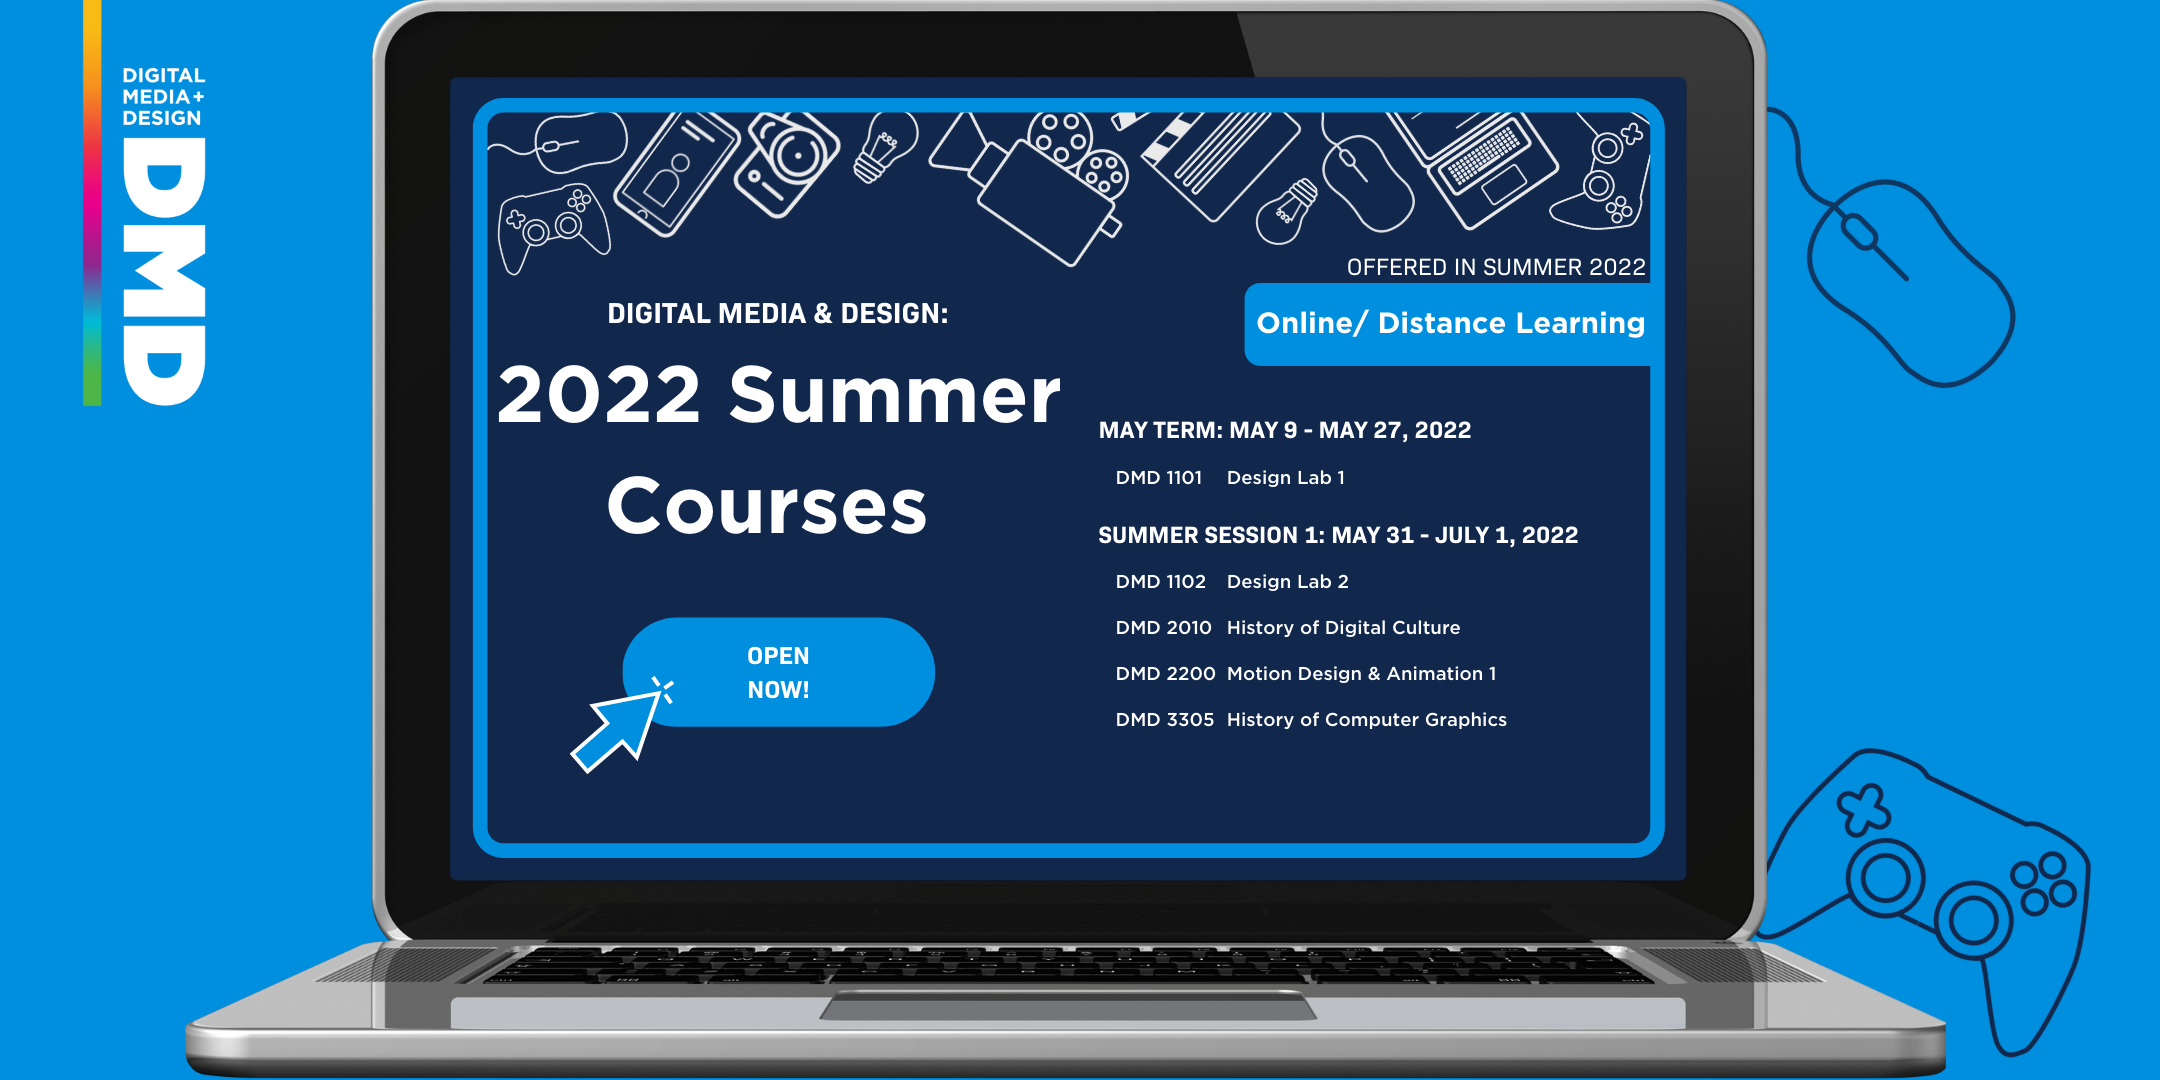 Top 8 uconn summer courses in 2022 Blog Hồng